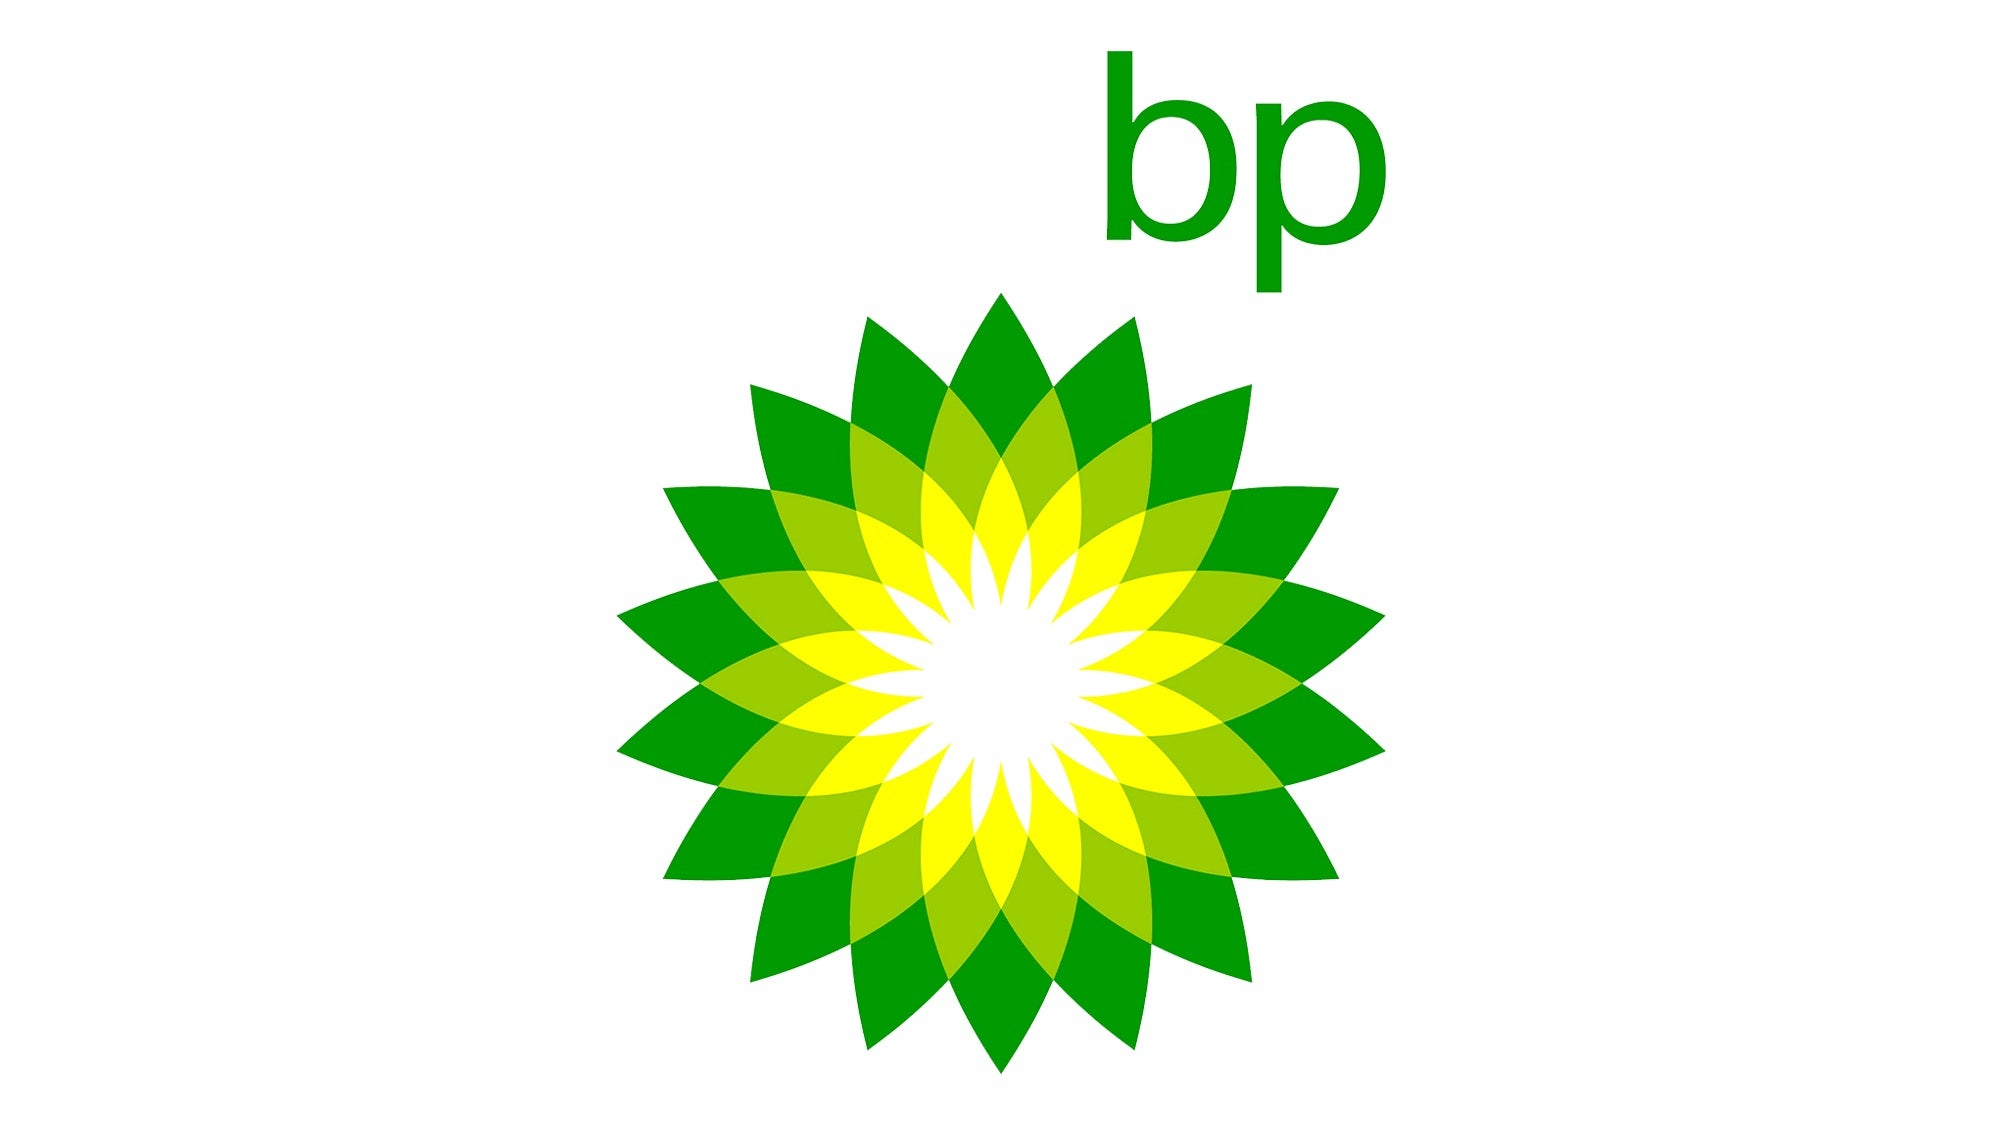 Merger Monday Vindicated This Analyst Who Nailed BP's Offer Price As Energy M&A Heats Up